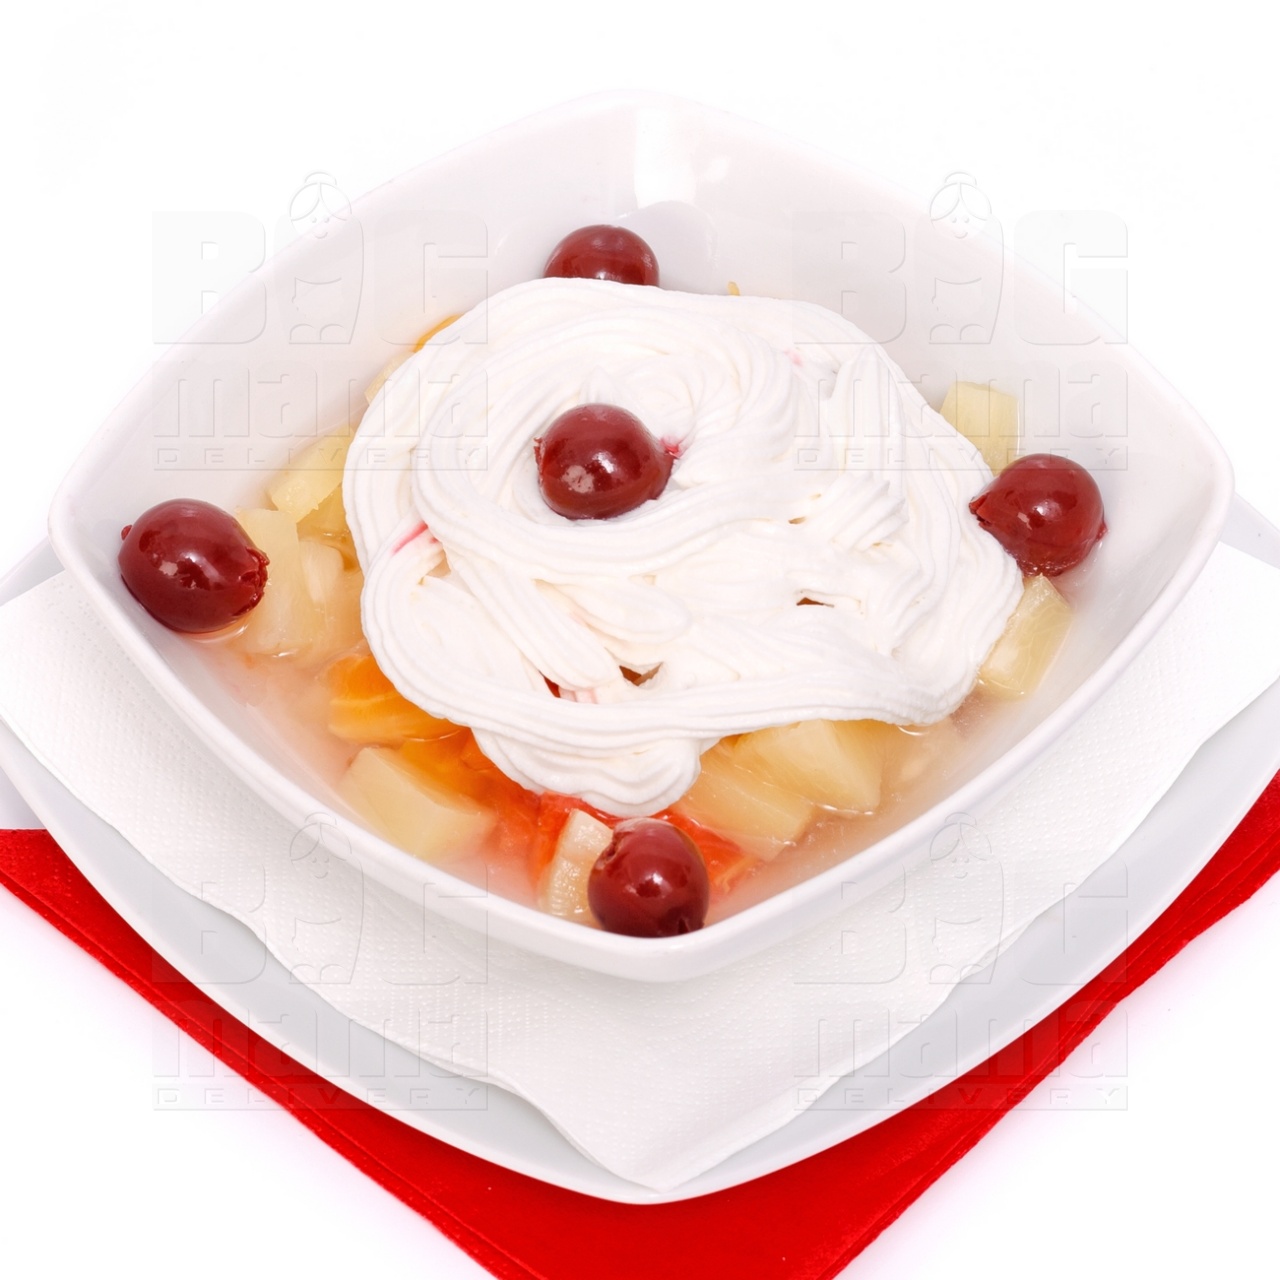 Product #81 image - Fruit salad with cream